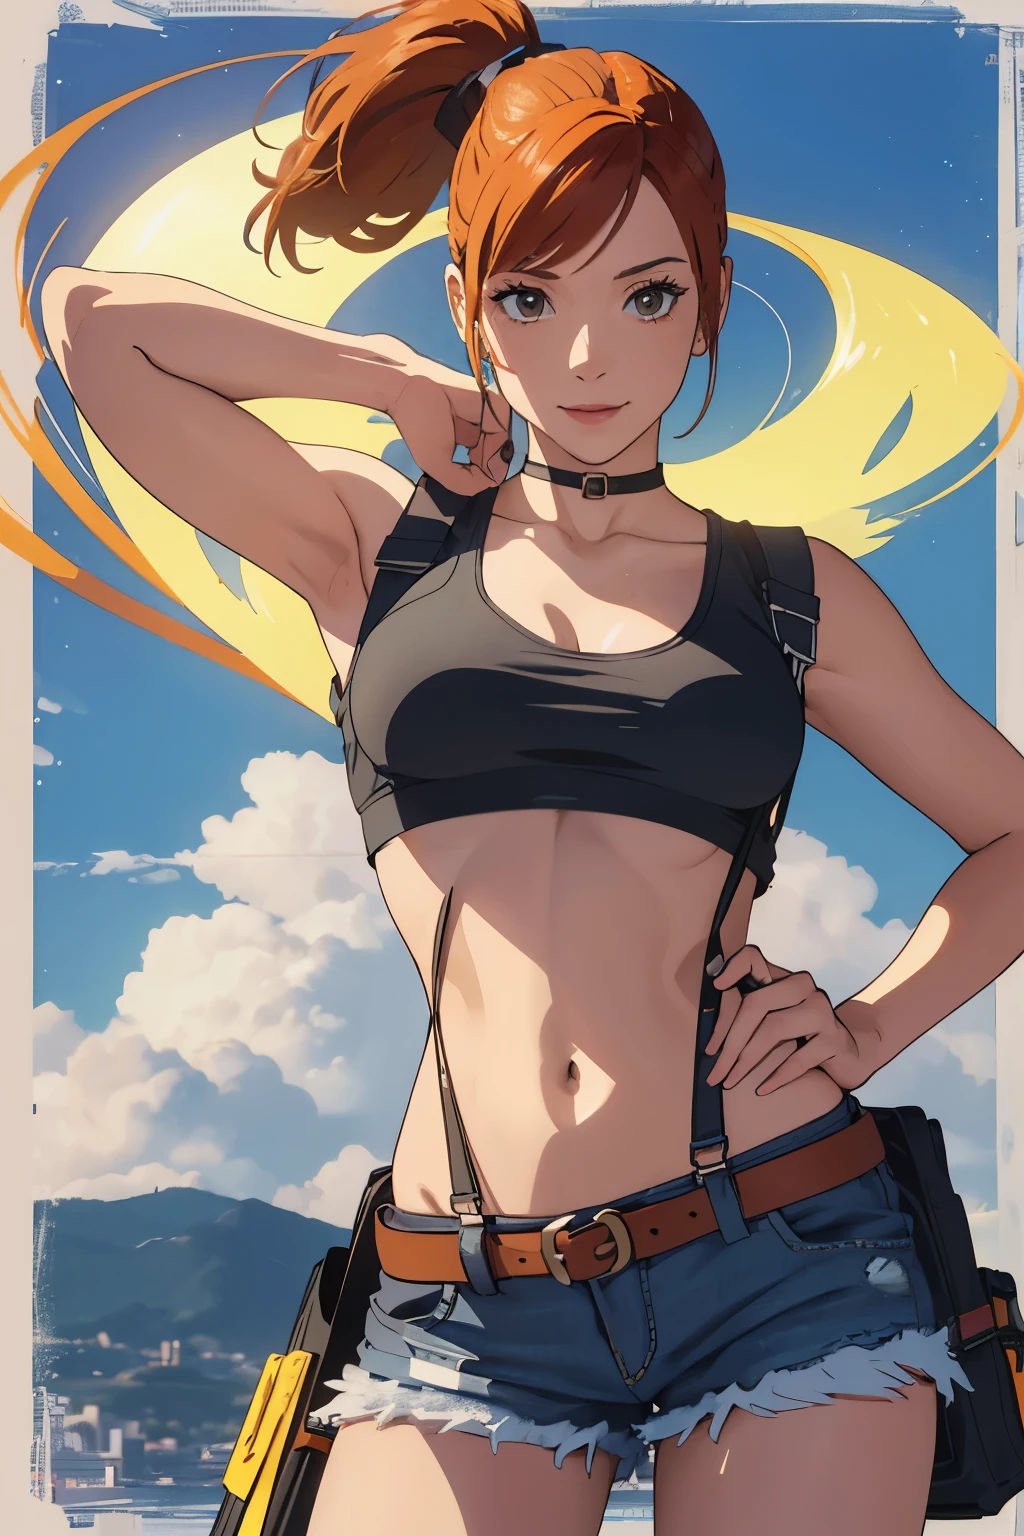 The centerpiece of the image is Misty from Pokémon, standing outdoors with a confident smile. Orange hair styled in a side ponytail, wearing denim shorts with suspenders, yellow crop top that shows off her midriff and navel. Yellow tank top. Cowboy shot posture exudes confidence and strength.

Misty is accompanied by a cute Dragon.

Overall, the image is a masterpiece, with high-quality details and a realistic rendering of Misty, her outfit, and her companion dragon. The colors are vivid and eye-catching, and the image is high-resolution, capturing every nuance of Misty's confident and adventurous spirit.